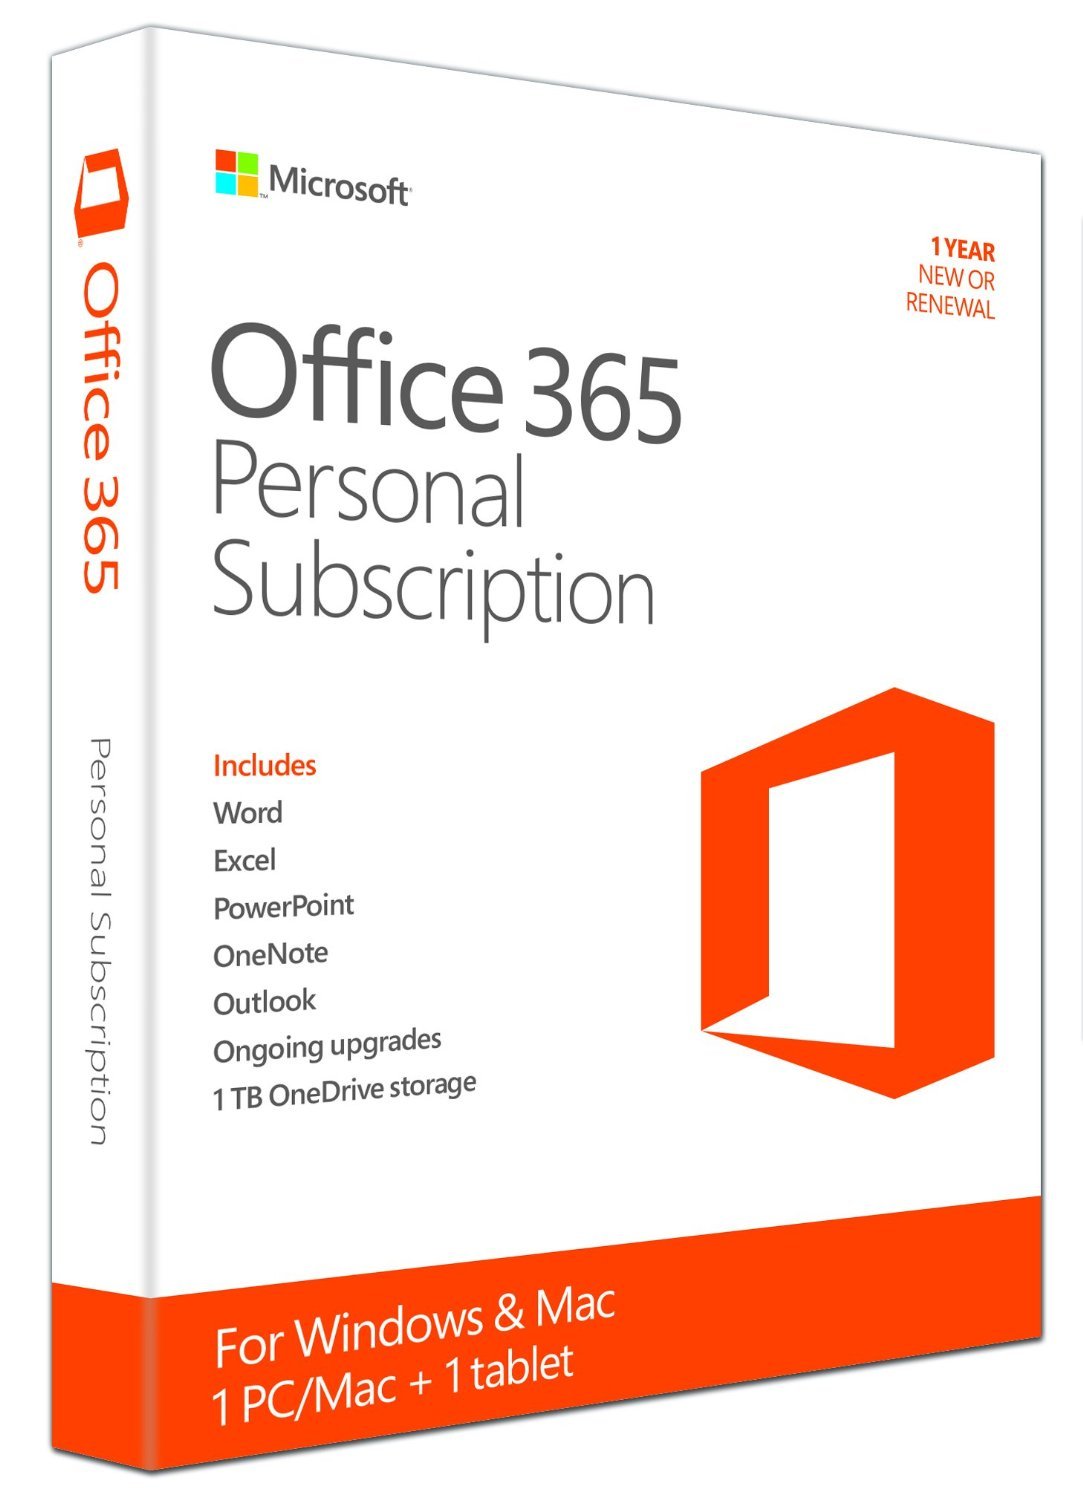 microsoft office 365 personal account